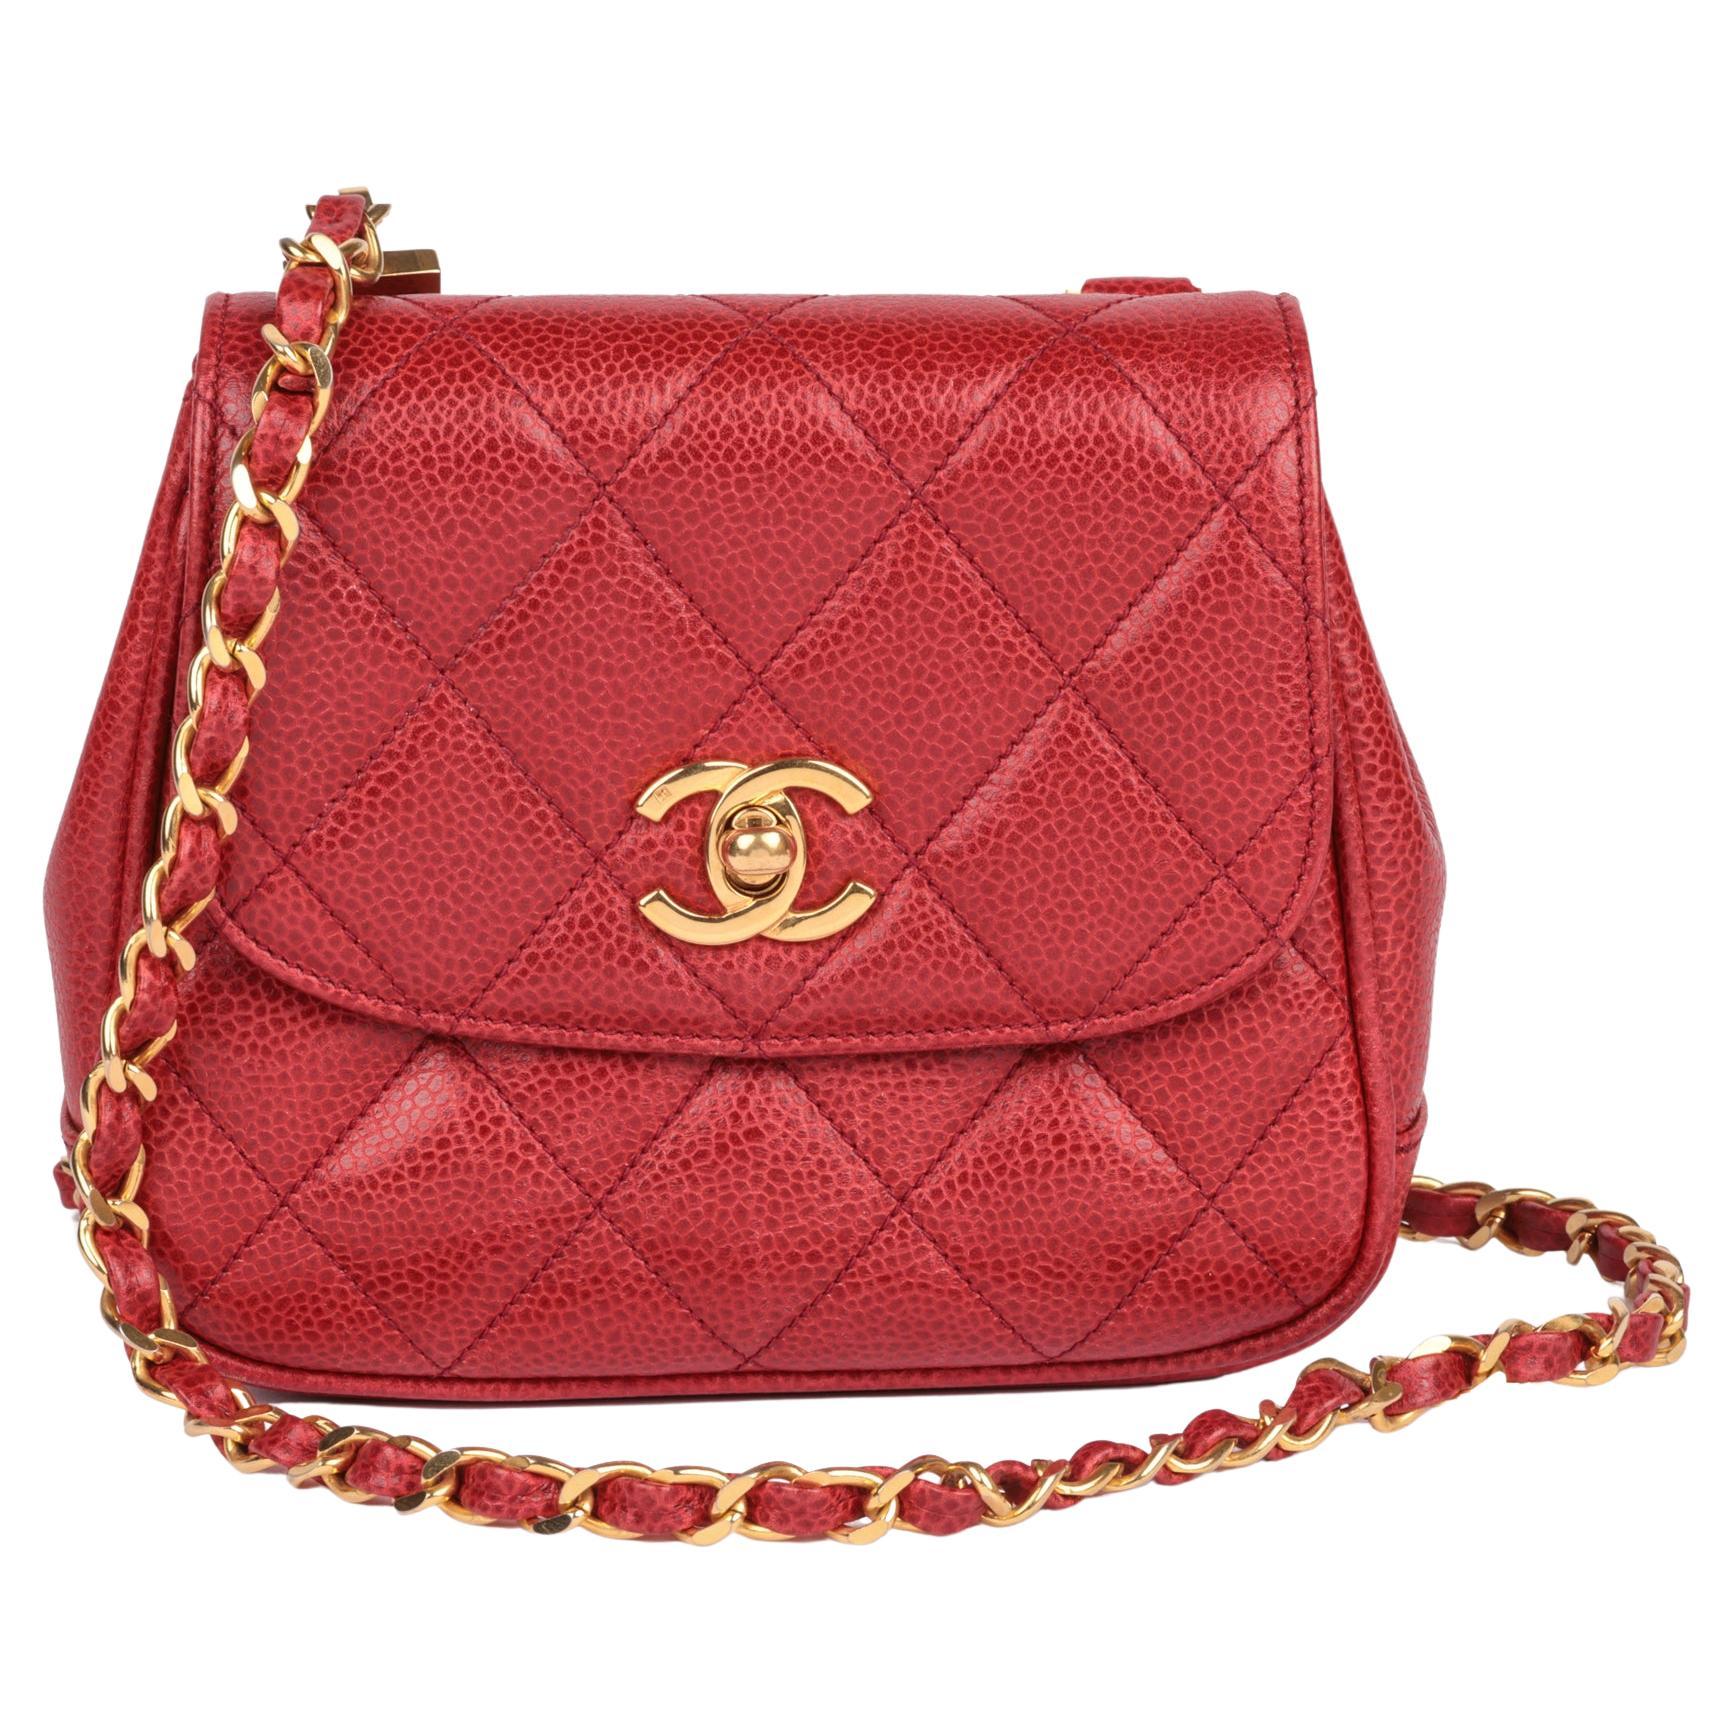 red and white chanel bag black